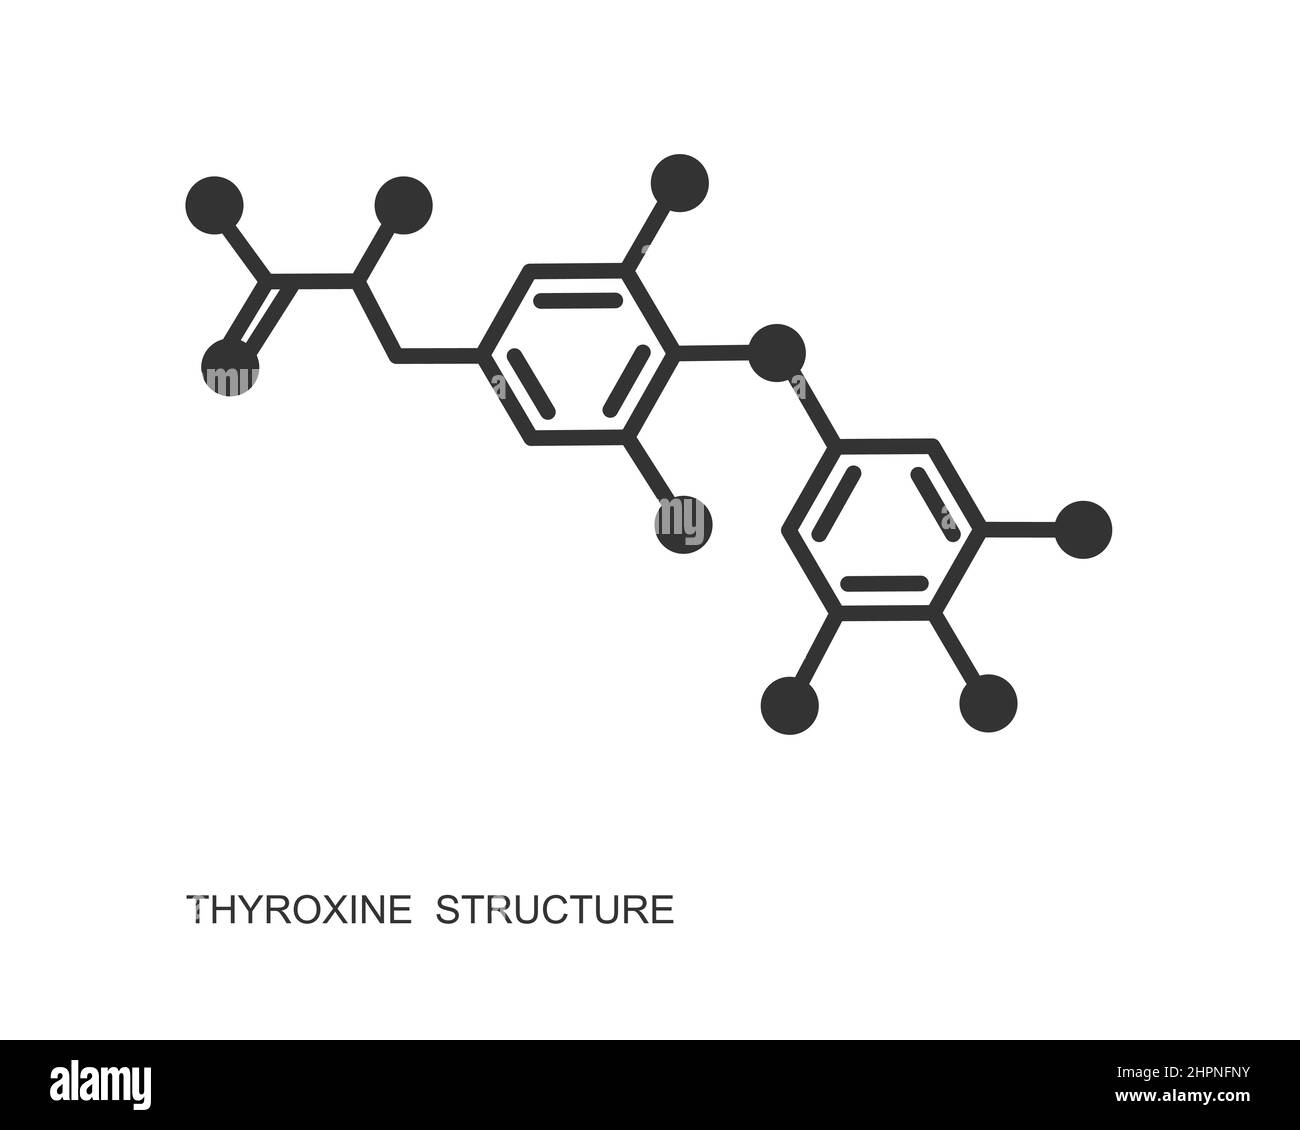 Thyroxine chemical molecular structure. Major endogenous hormone secreted by the thyroid gland isolated on white background. Vector graphic illustration. Stock Vector